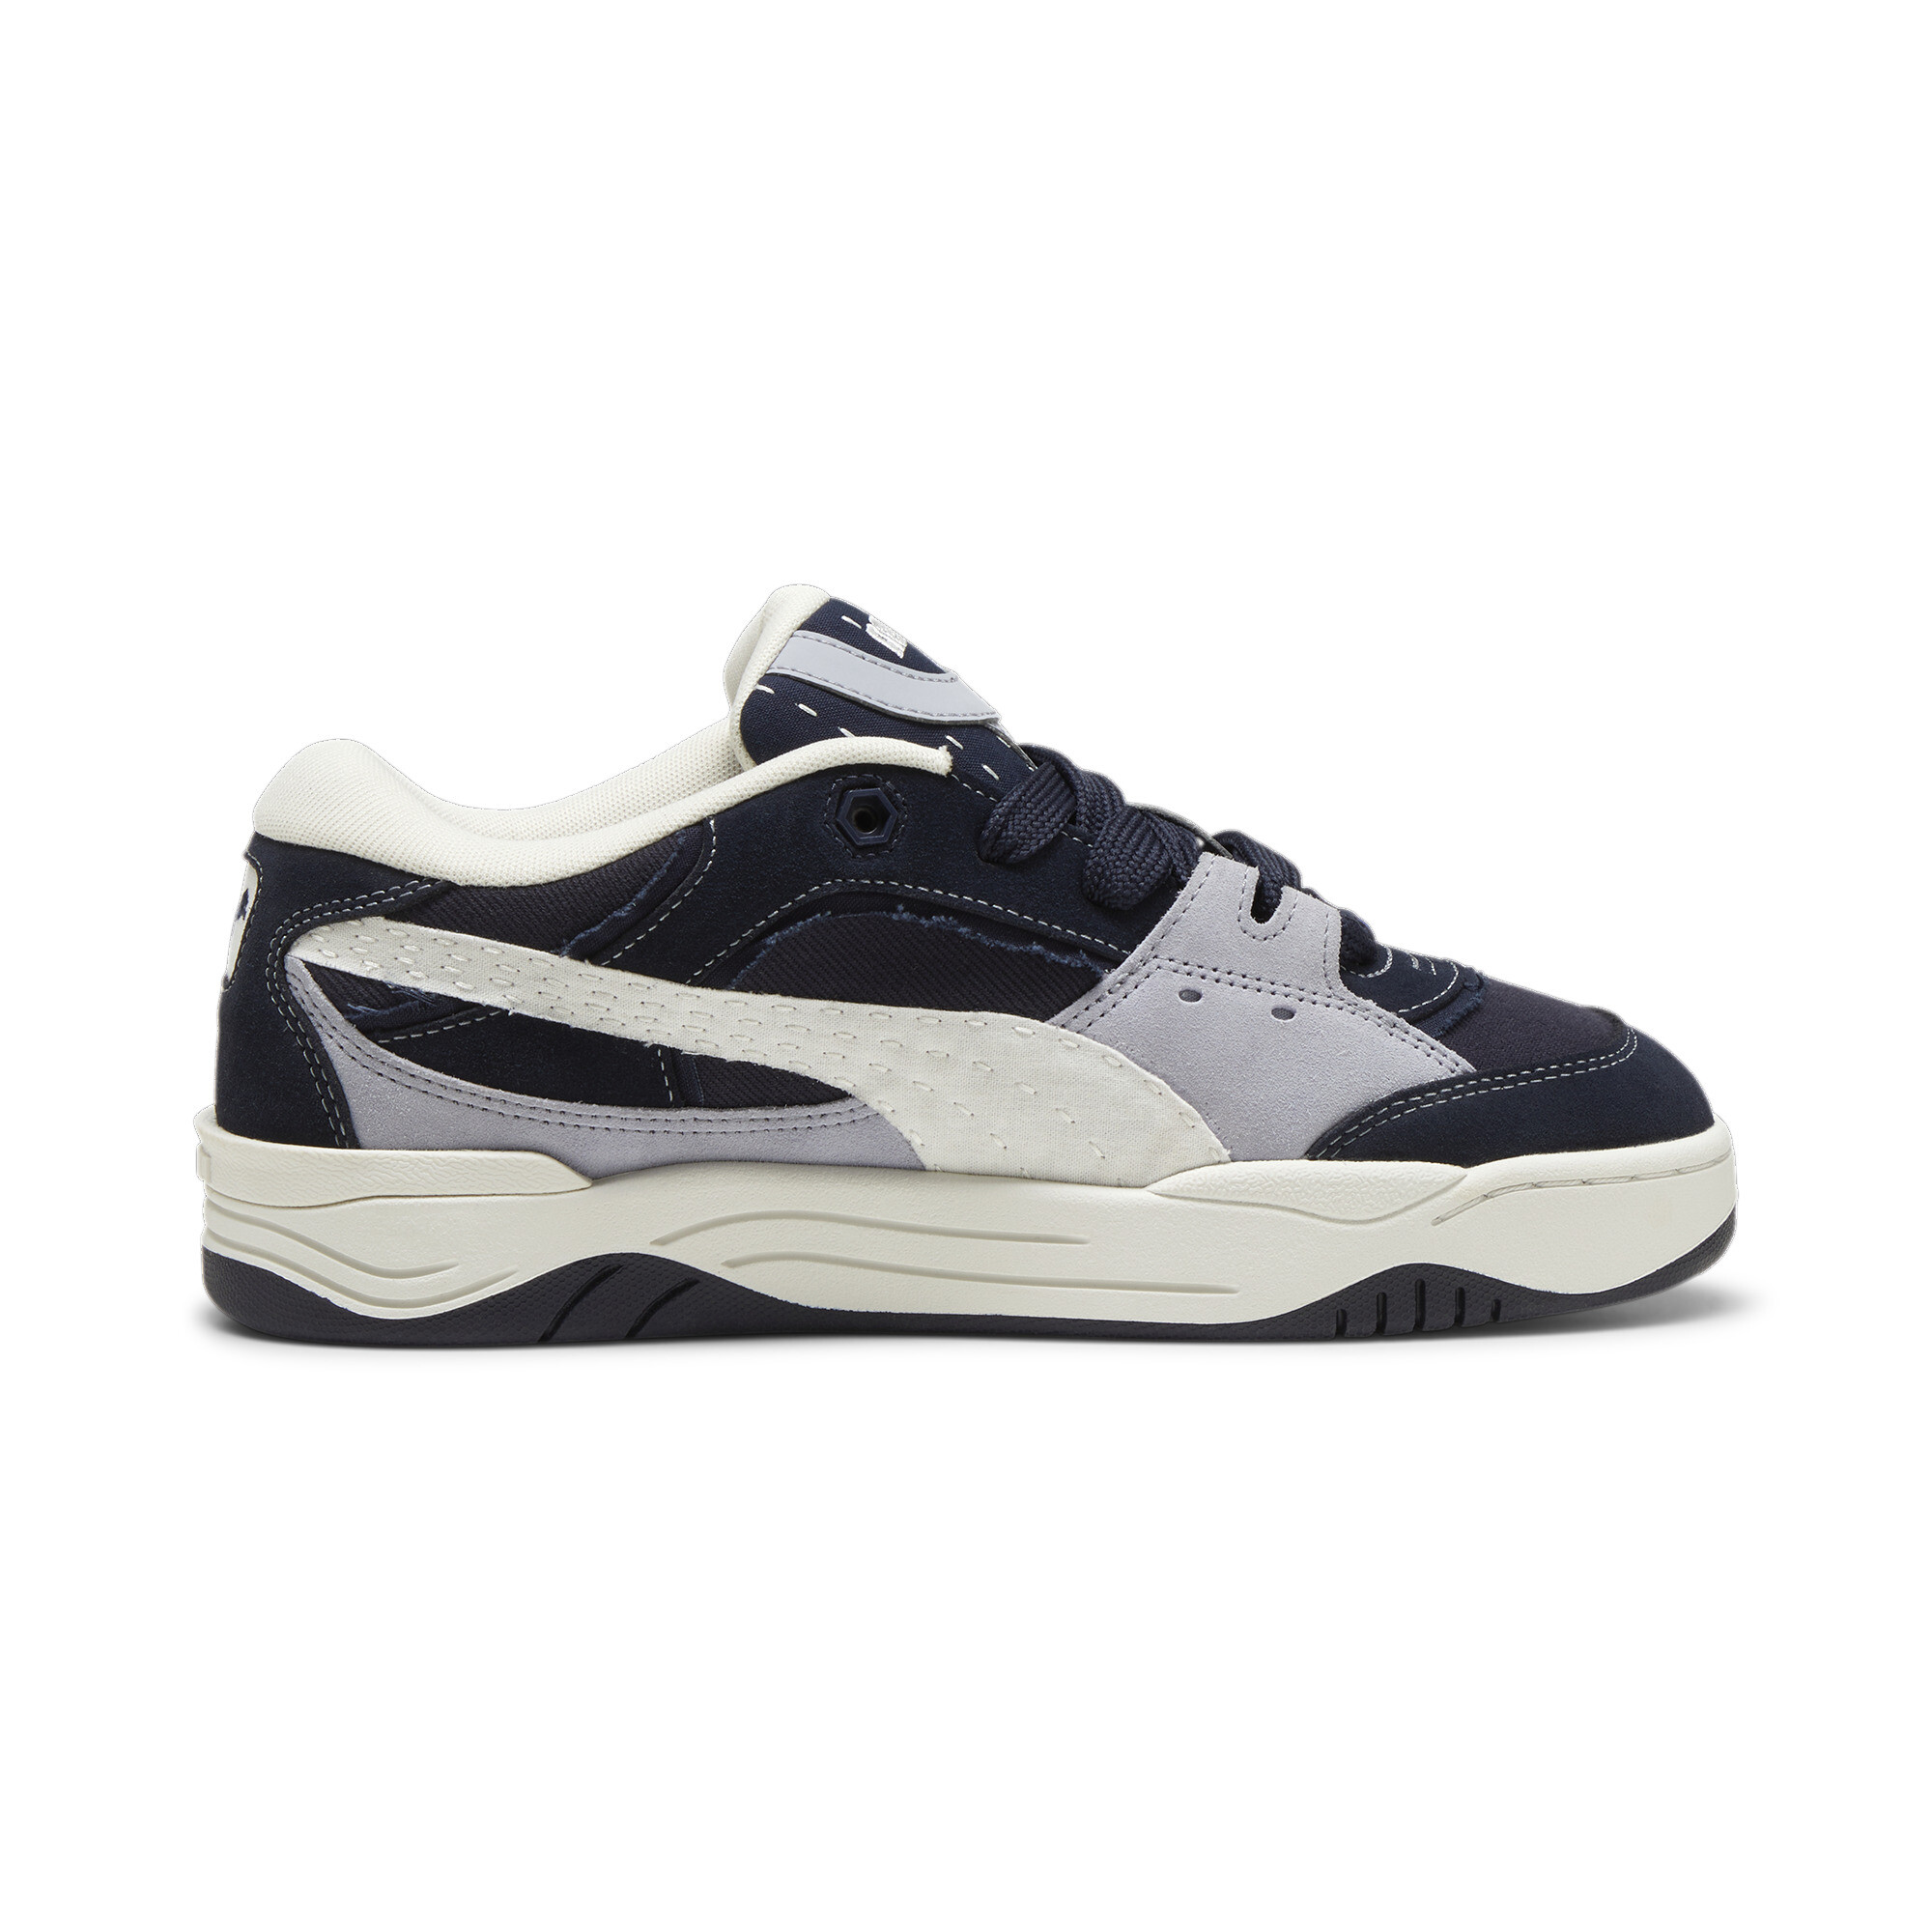 Puma-180 Skate Sneakers, Blue, Size 48, Shoes